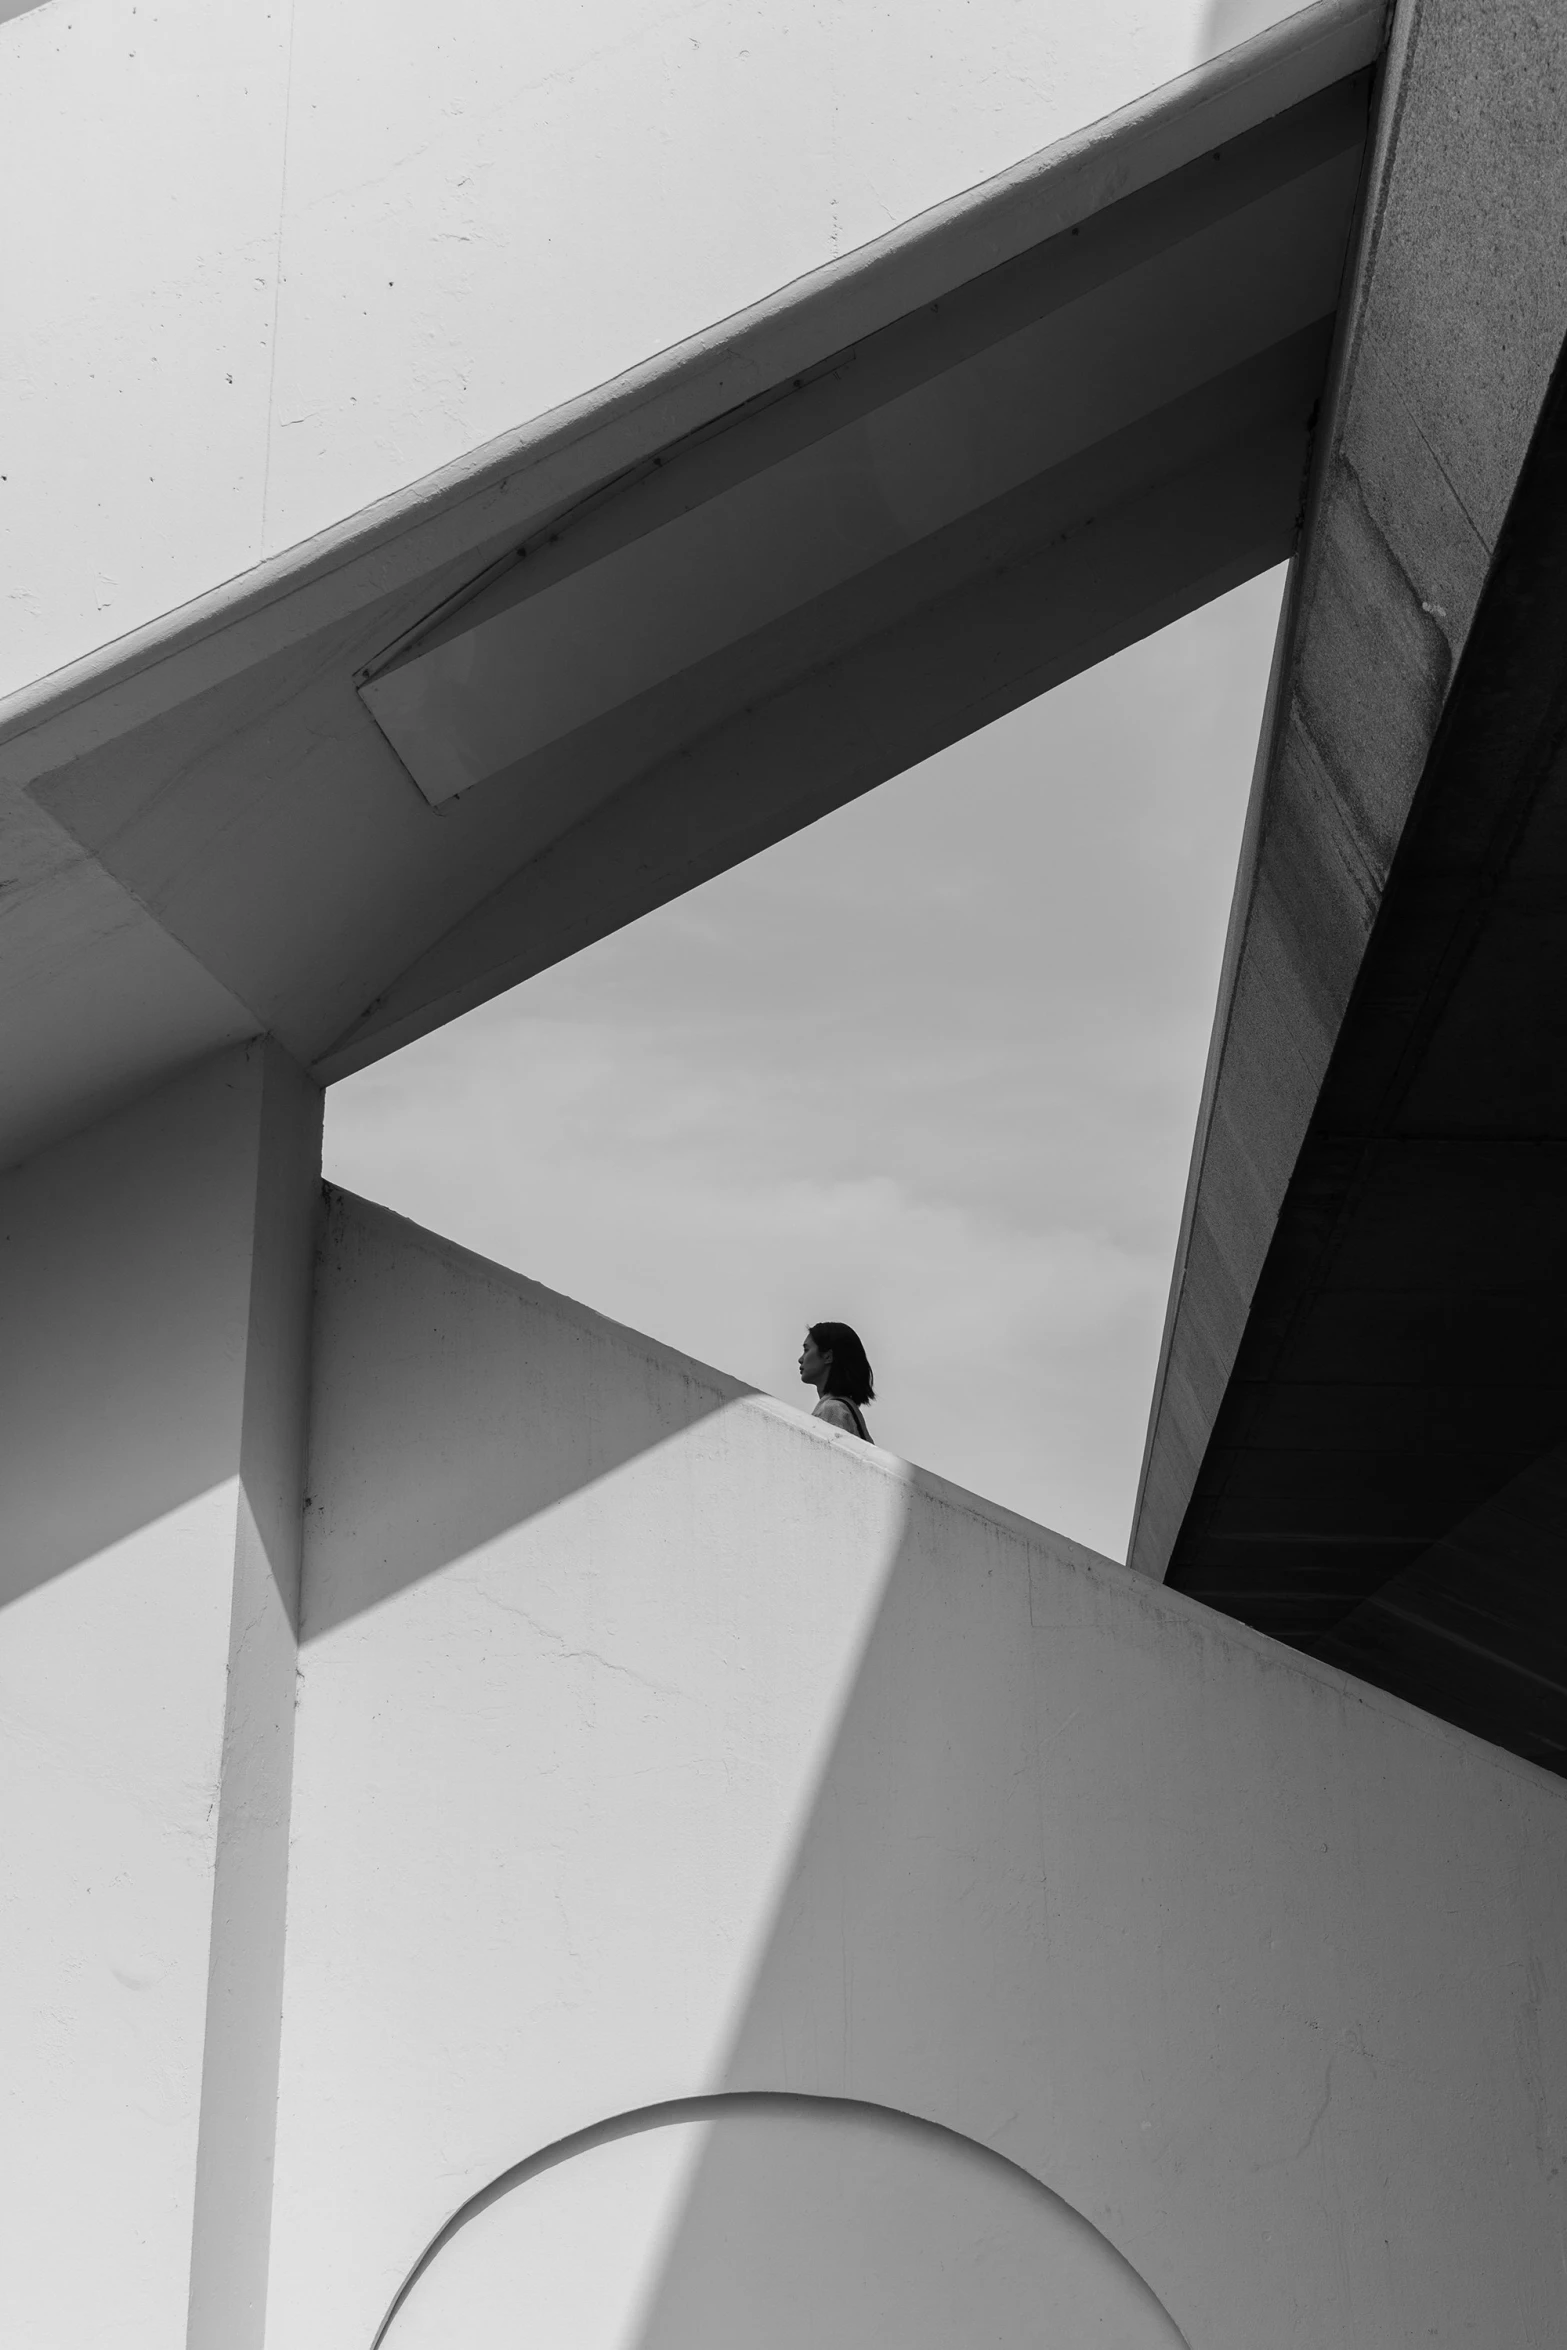 a black and white image of a bird perched on the edge of a building